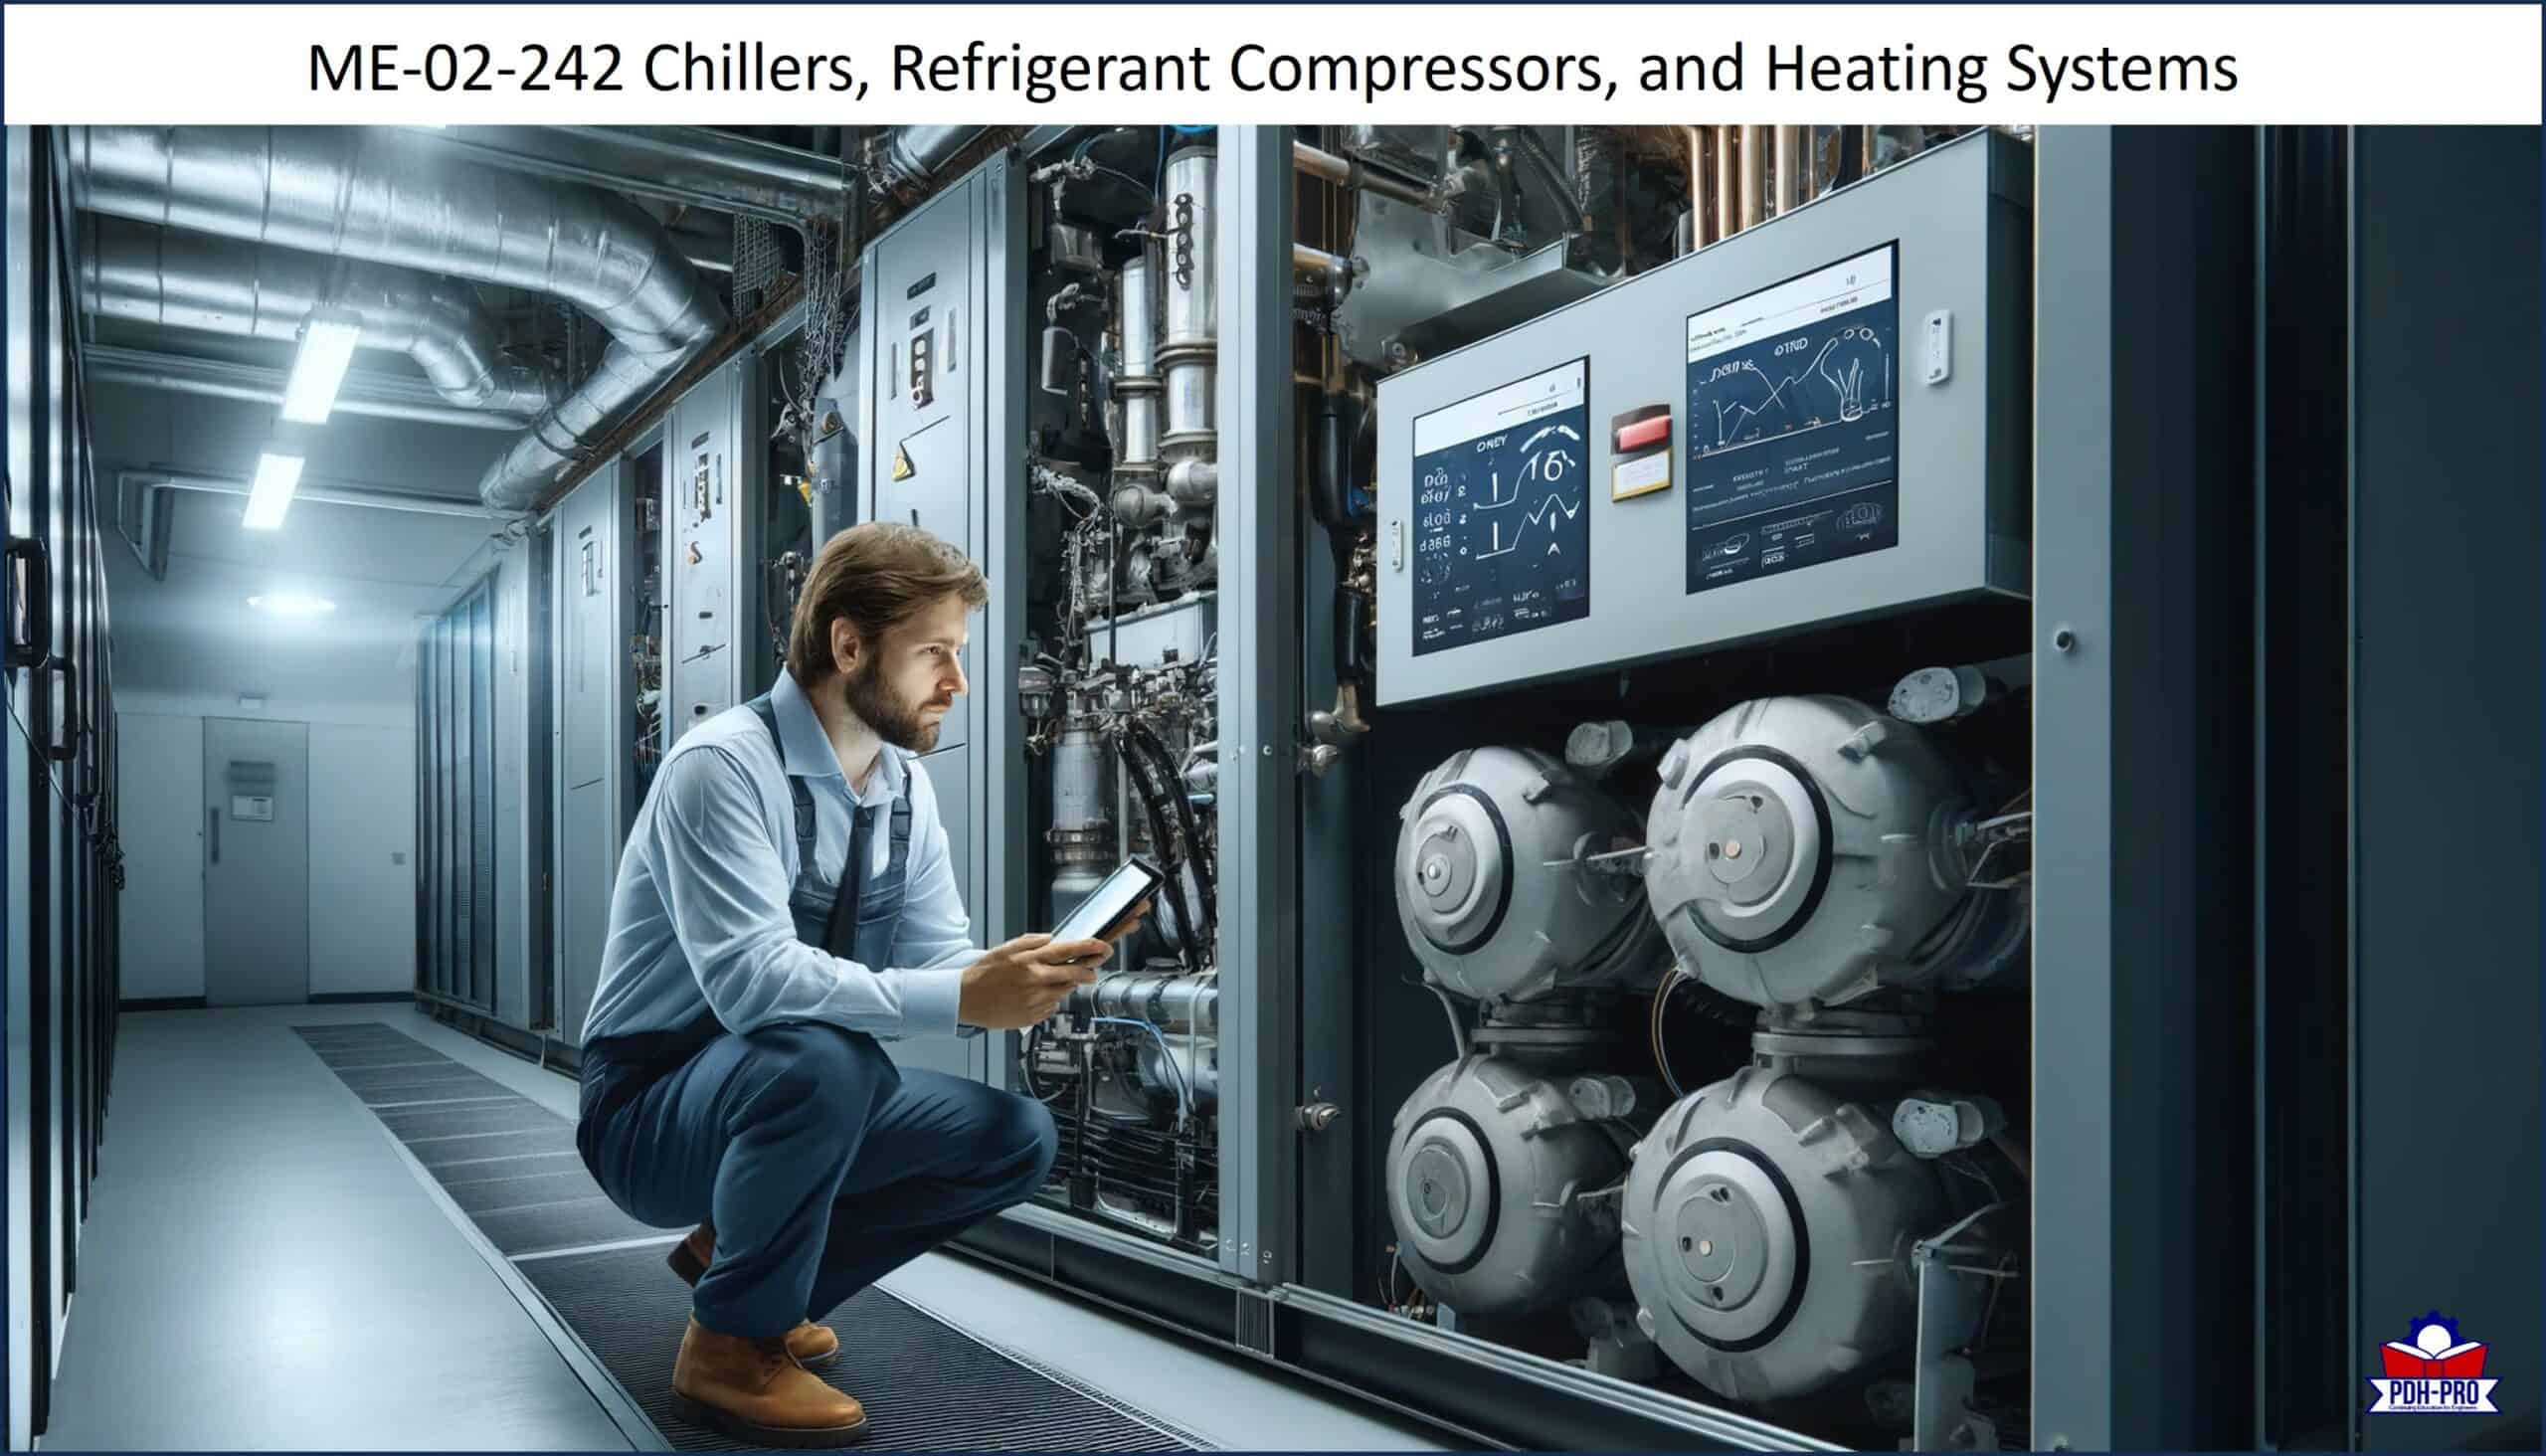 Chillers, Refrigerant Compressors, and Heating Systems